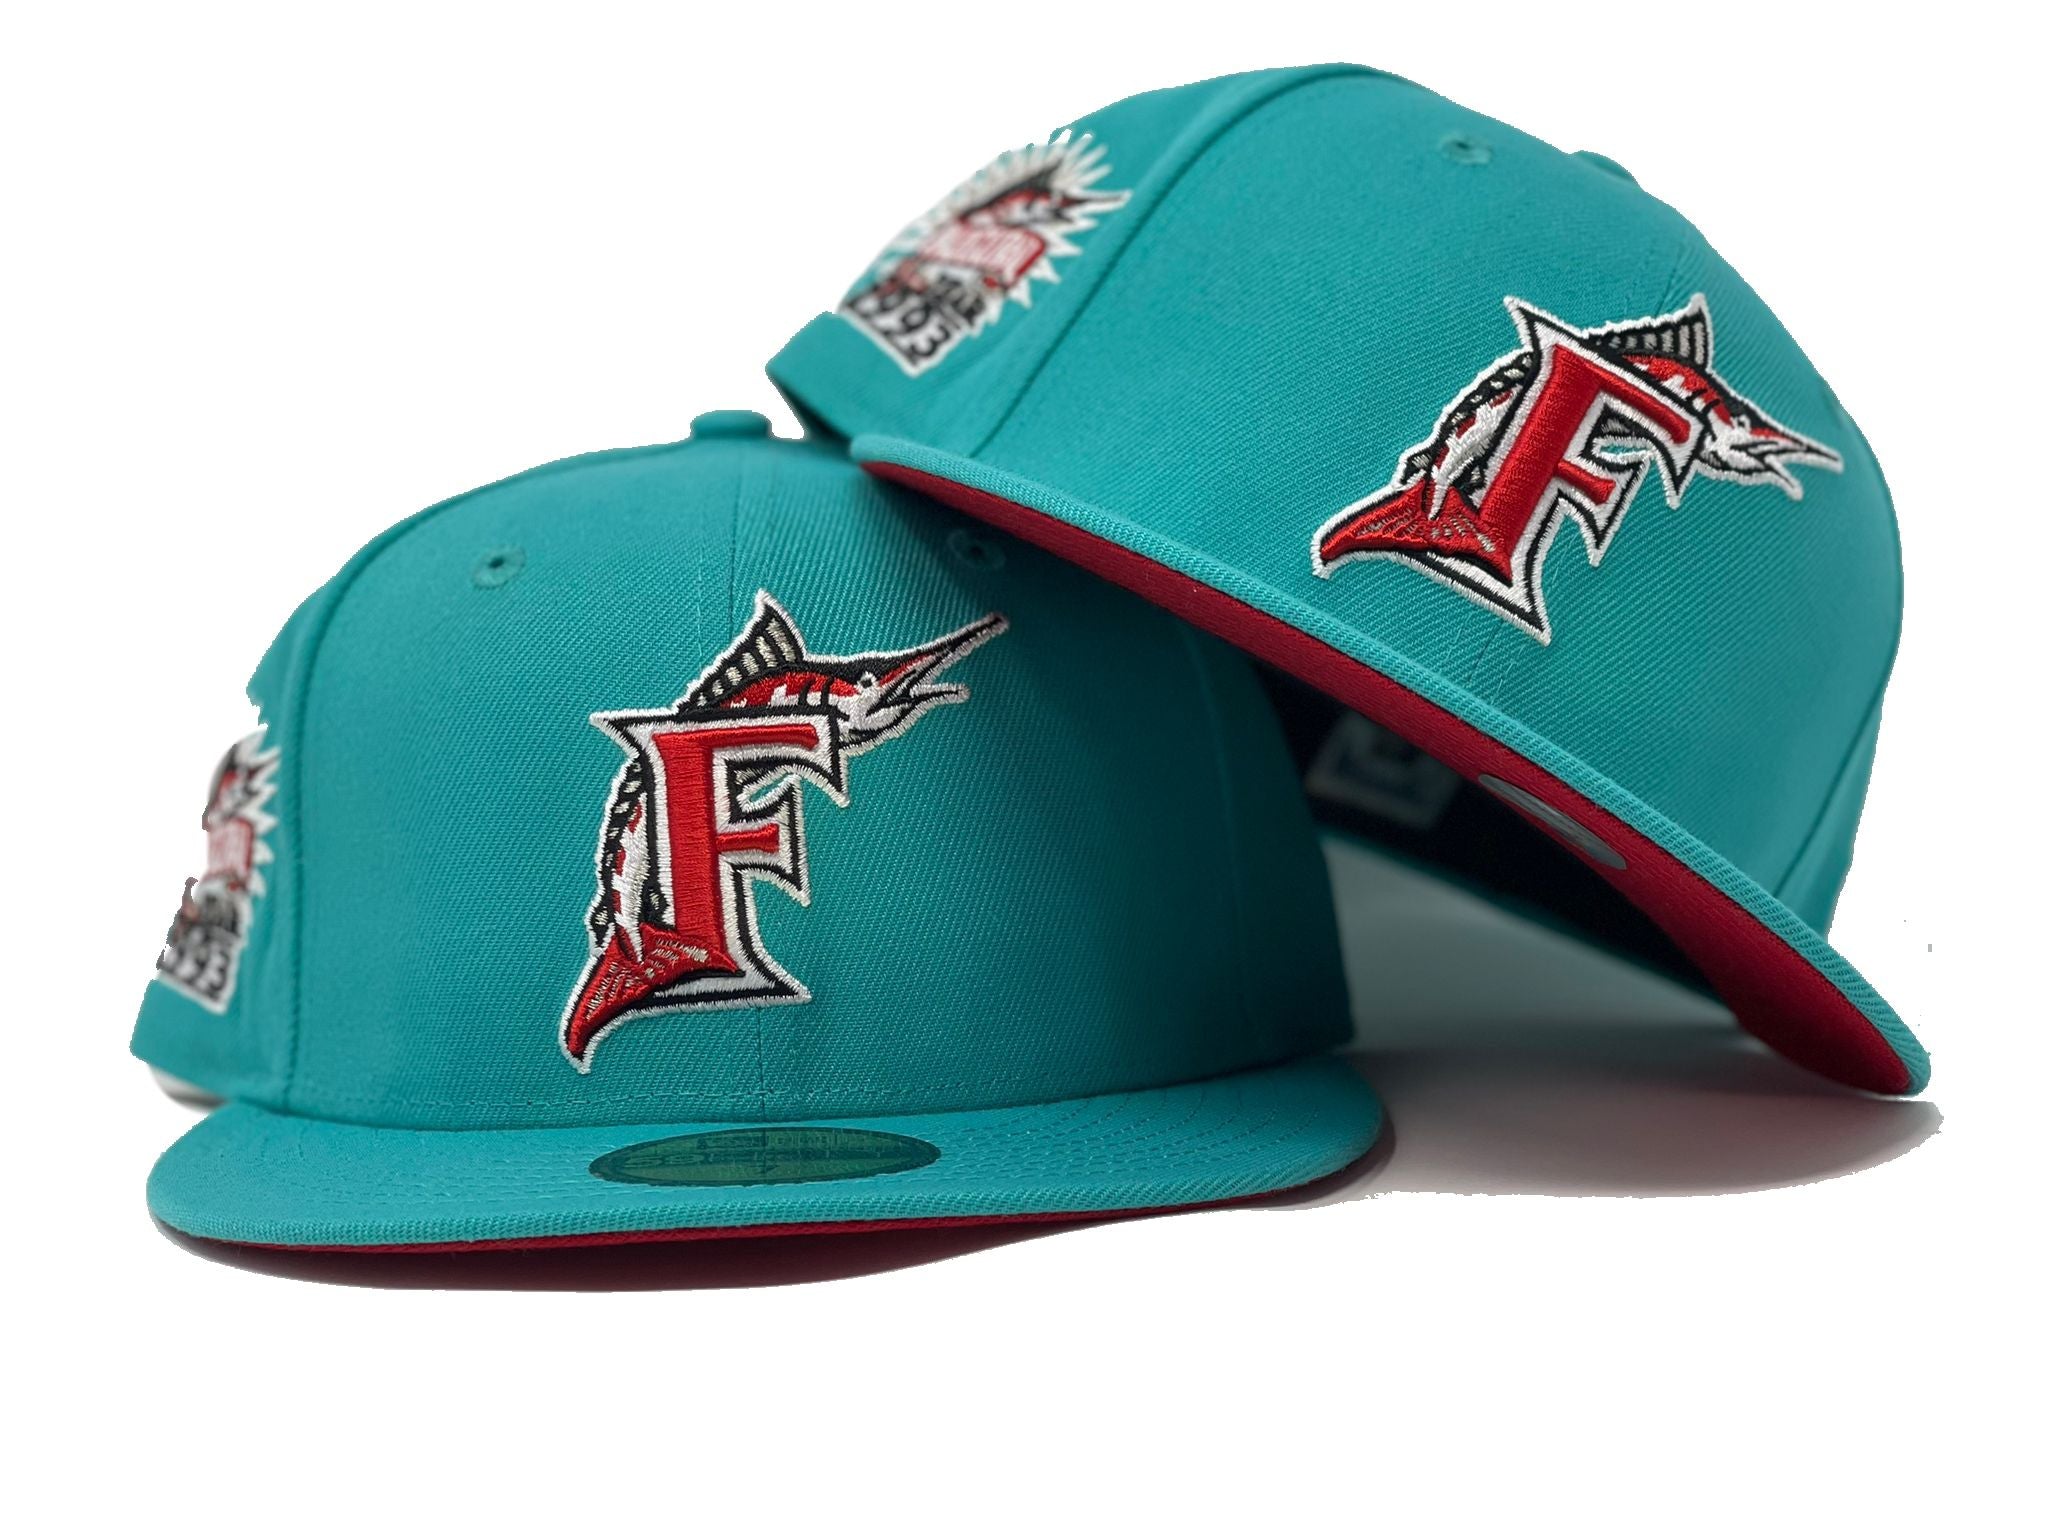 Men's New Era Teal Florida Marlins Cooperstown Collection Turn Back The Clock 59FIFTY Fitted Hat